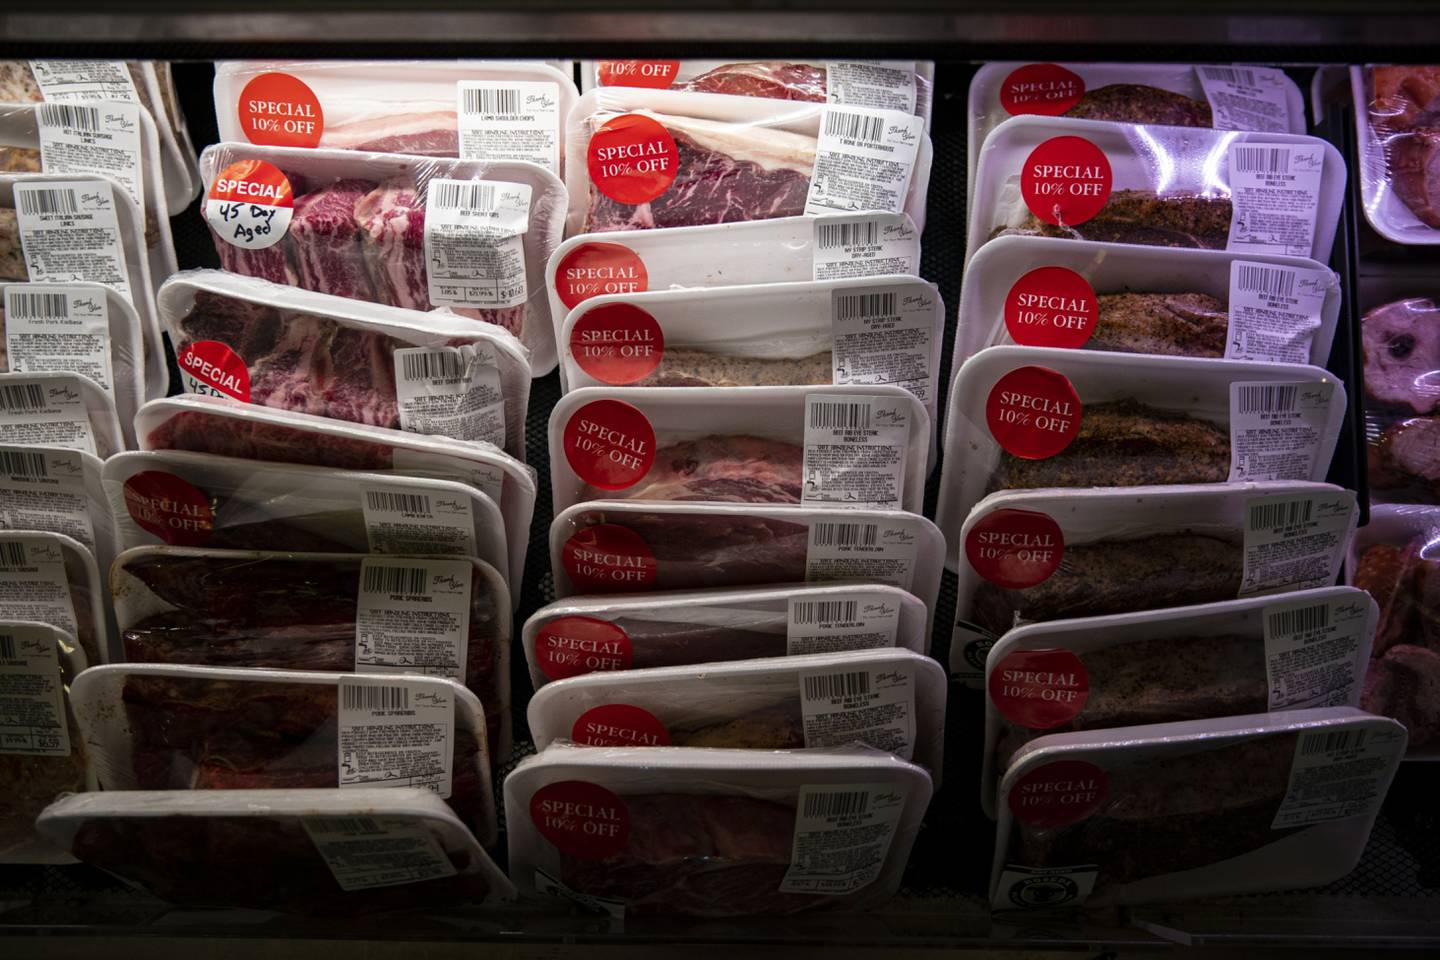 Cuts of meat on offer at a butcher shop in Washington, D.C.dfd